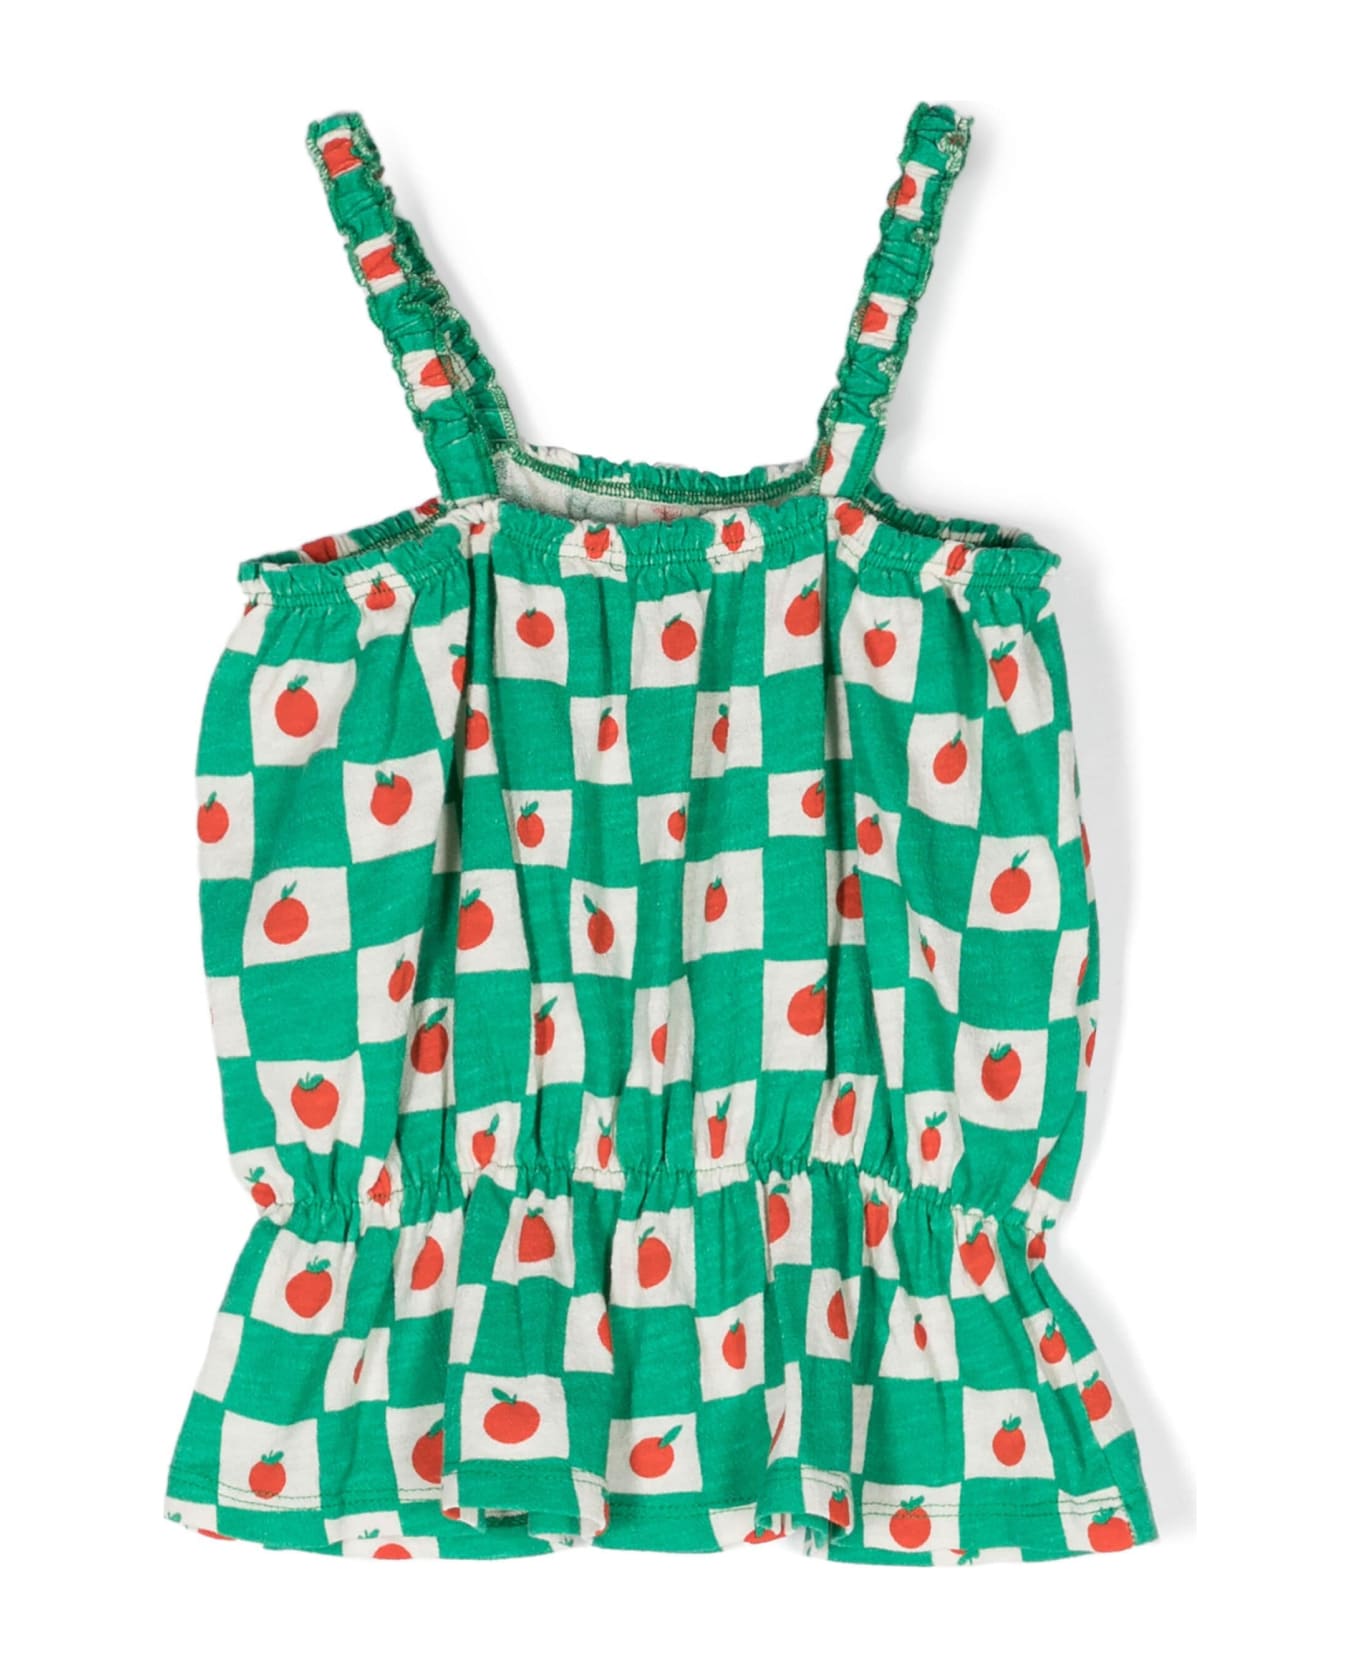 Bobo Choses Green Top For Girl With Tomatoes - Green